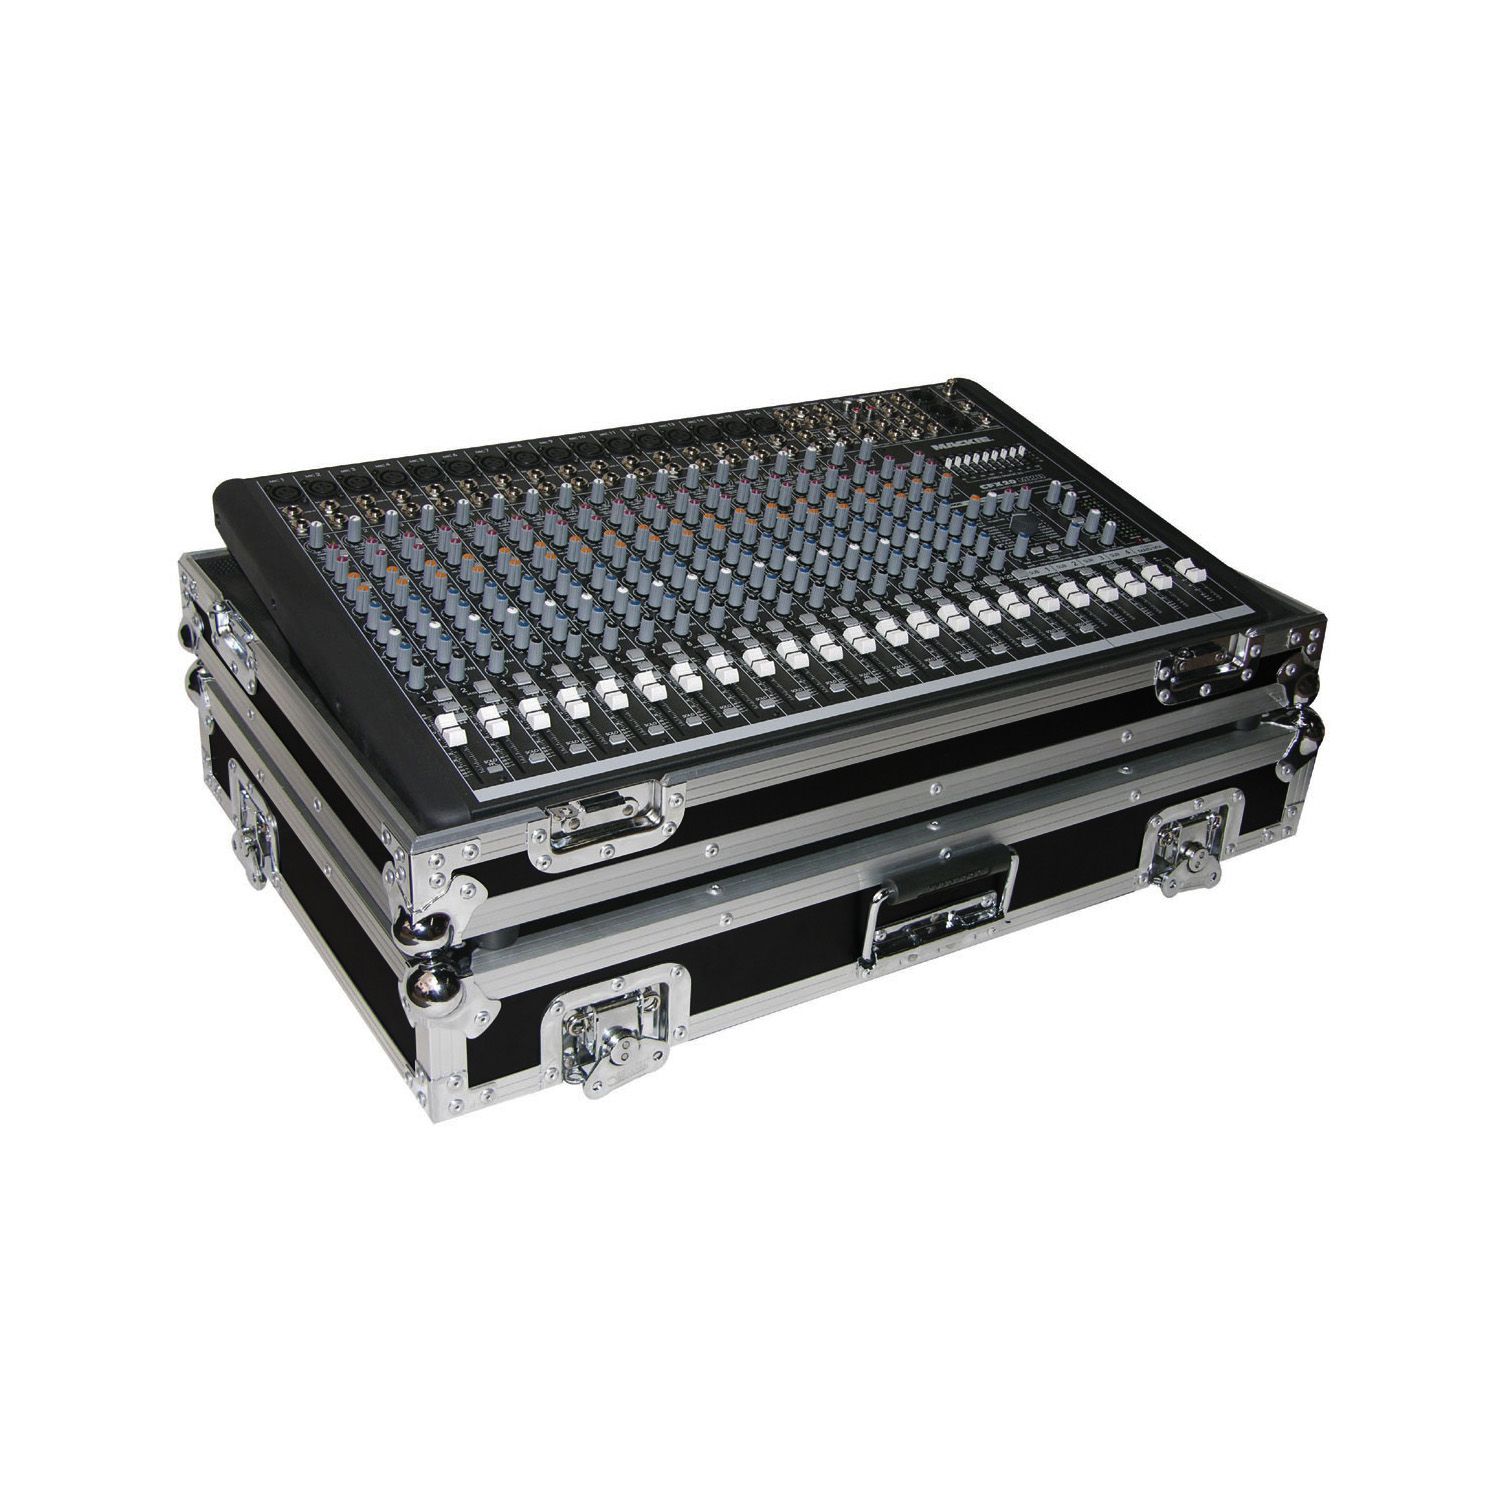 Flight Road Case for Mackie CFX20MKII Pro Mixer And Other Mixers Easy Locking Fit And Tongue Heavy And Powerful Ball Corners Industrial Strength Latches And Rubber Feet DEEJAY LED TBHDJSTAND26 